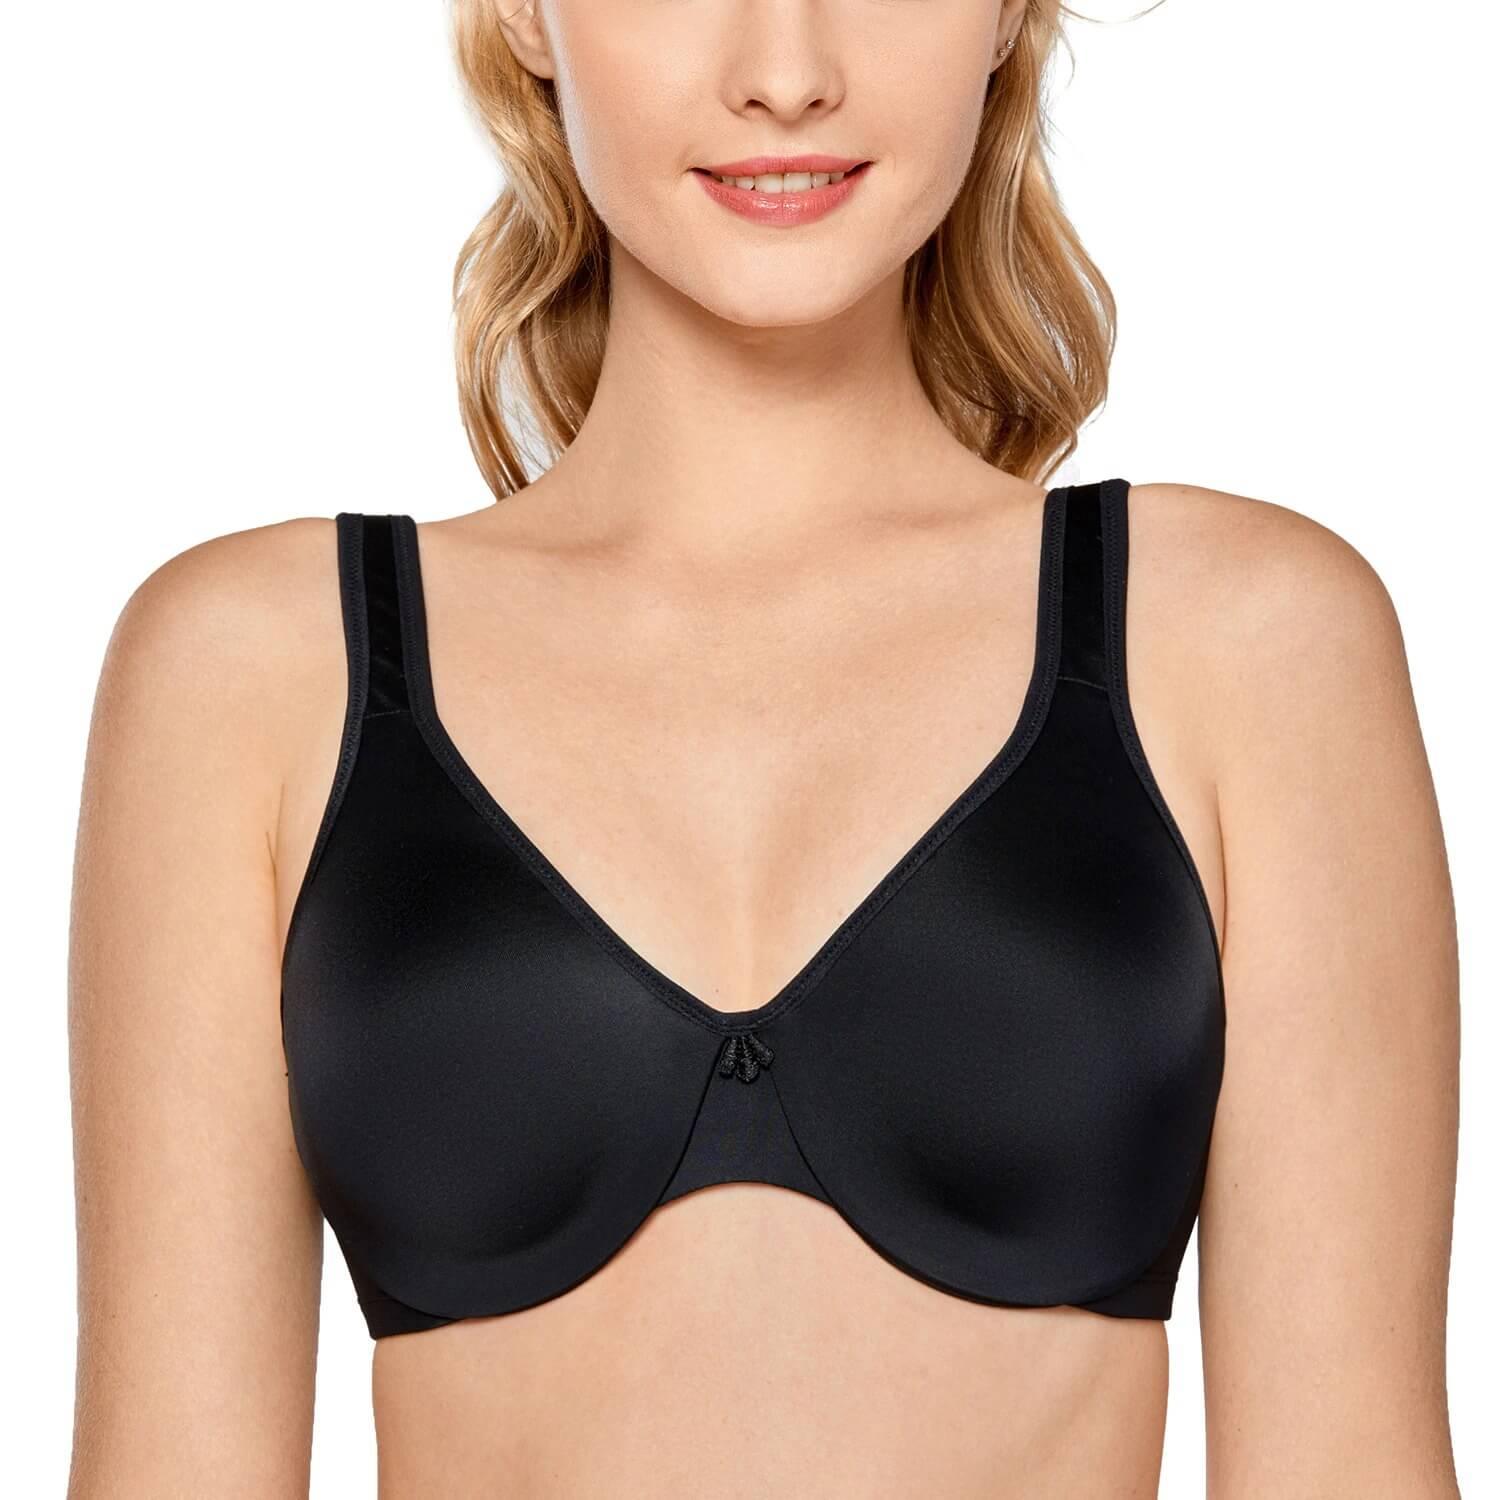 Is this bra suitable for a double JJ cup size? Tired of buying thing that  don't work 😩